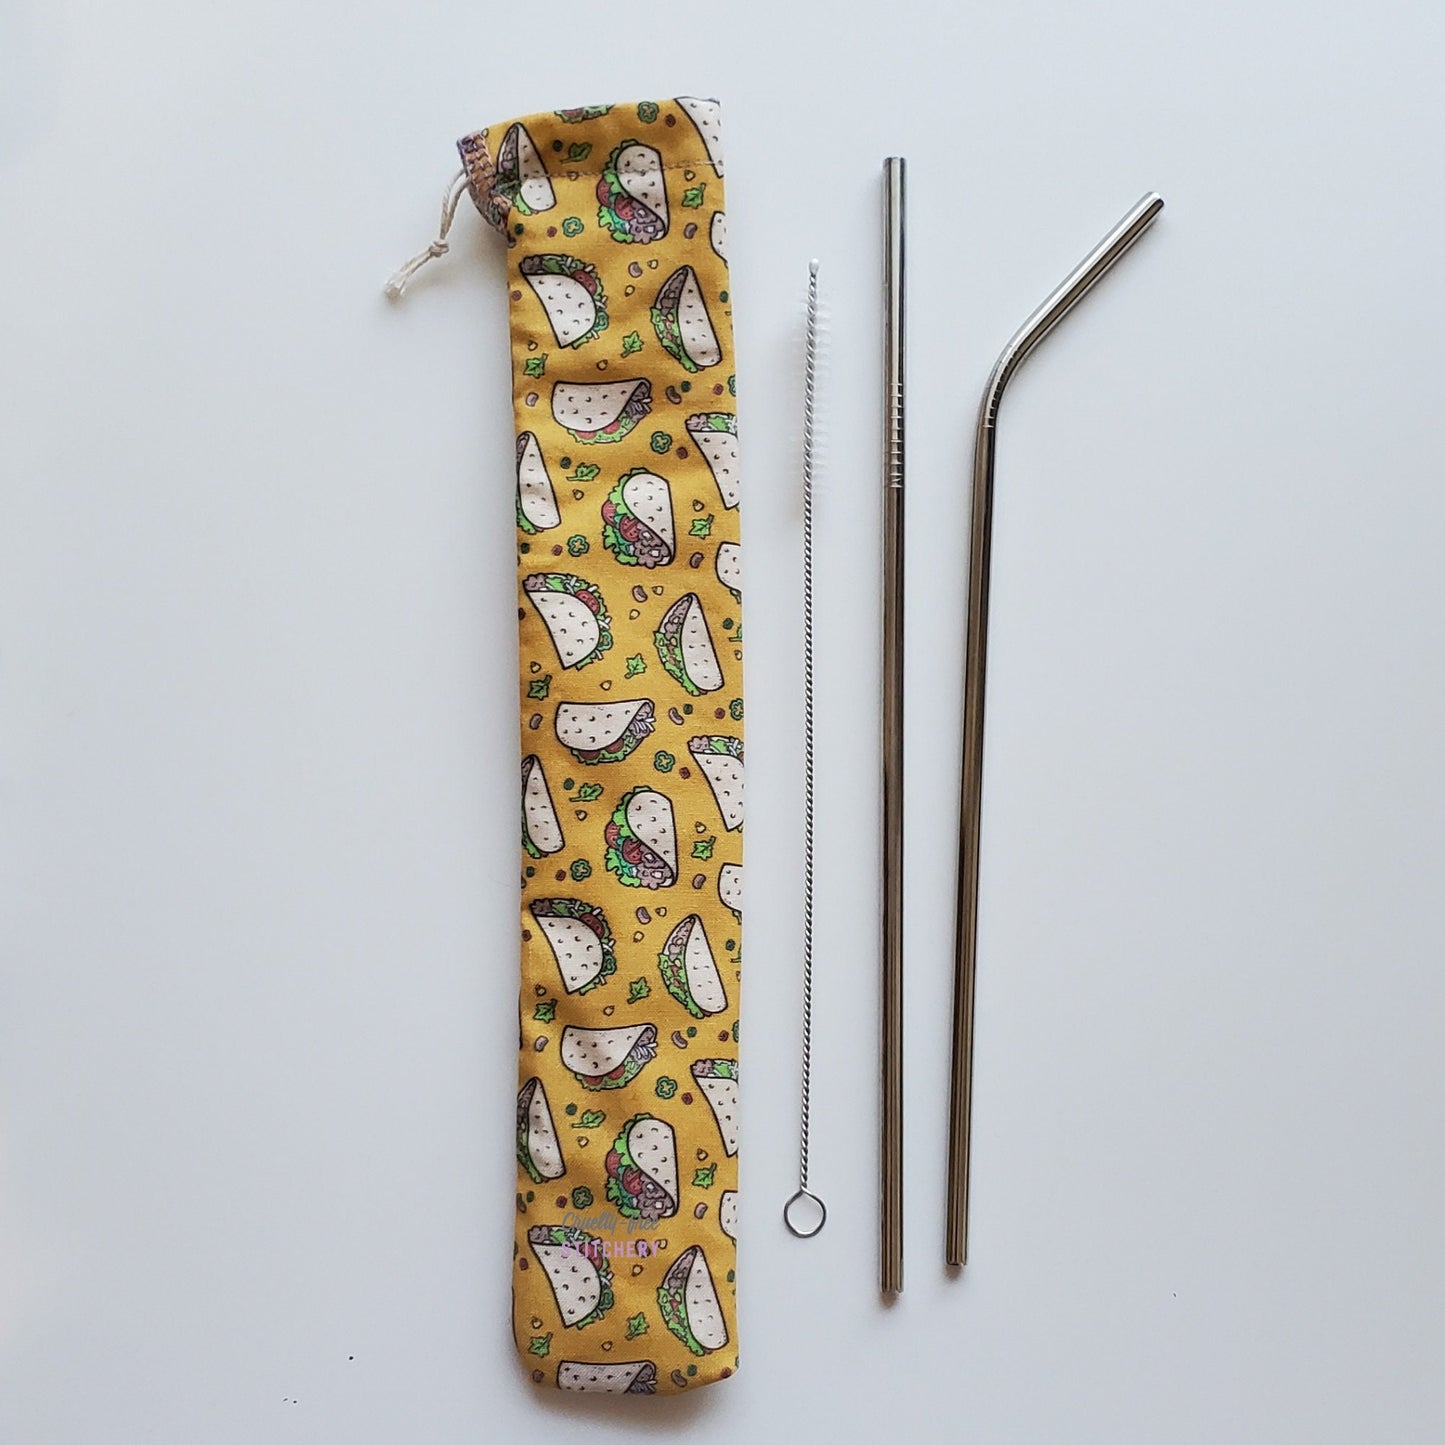 Reusable straw pouch in the same taco print laying vertically next to a straw cleaner brush, a straight stainless steel straw, and a bent stainless steel straw.